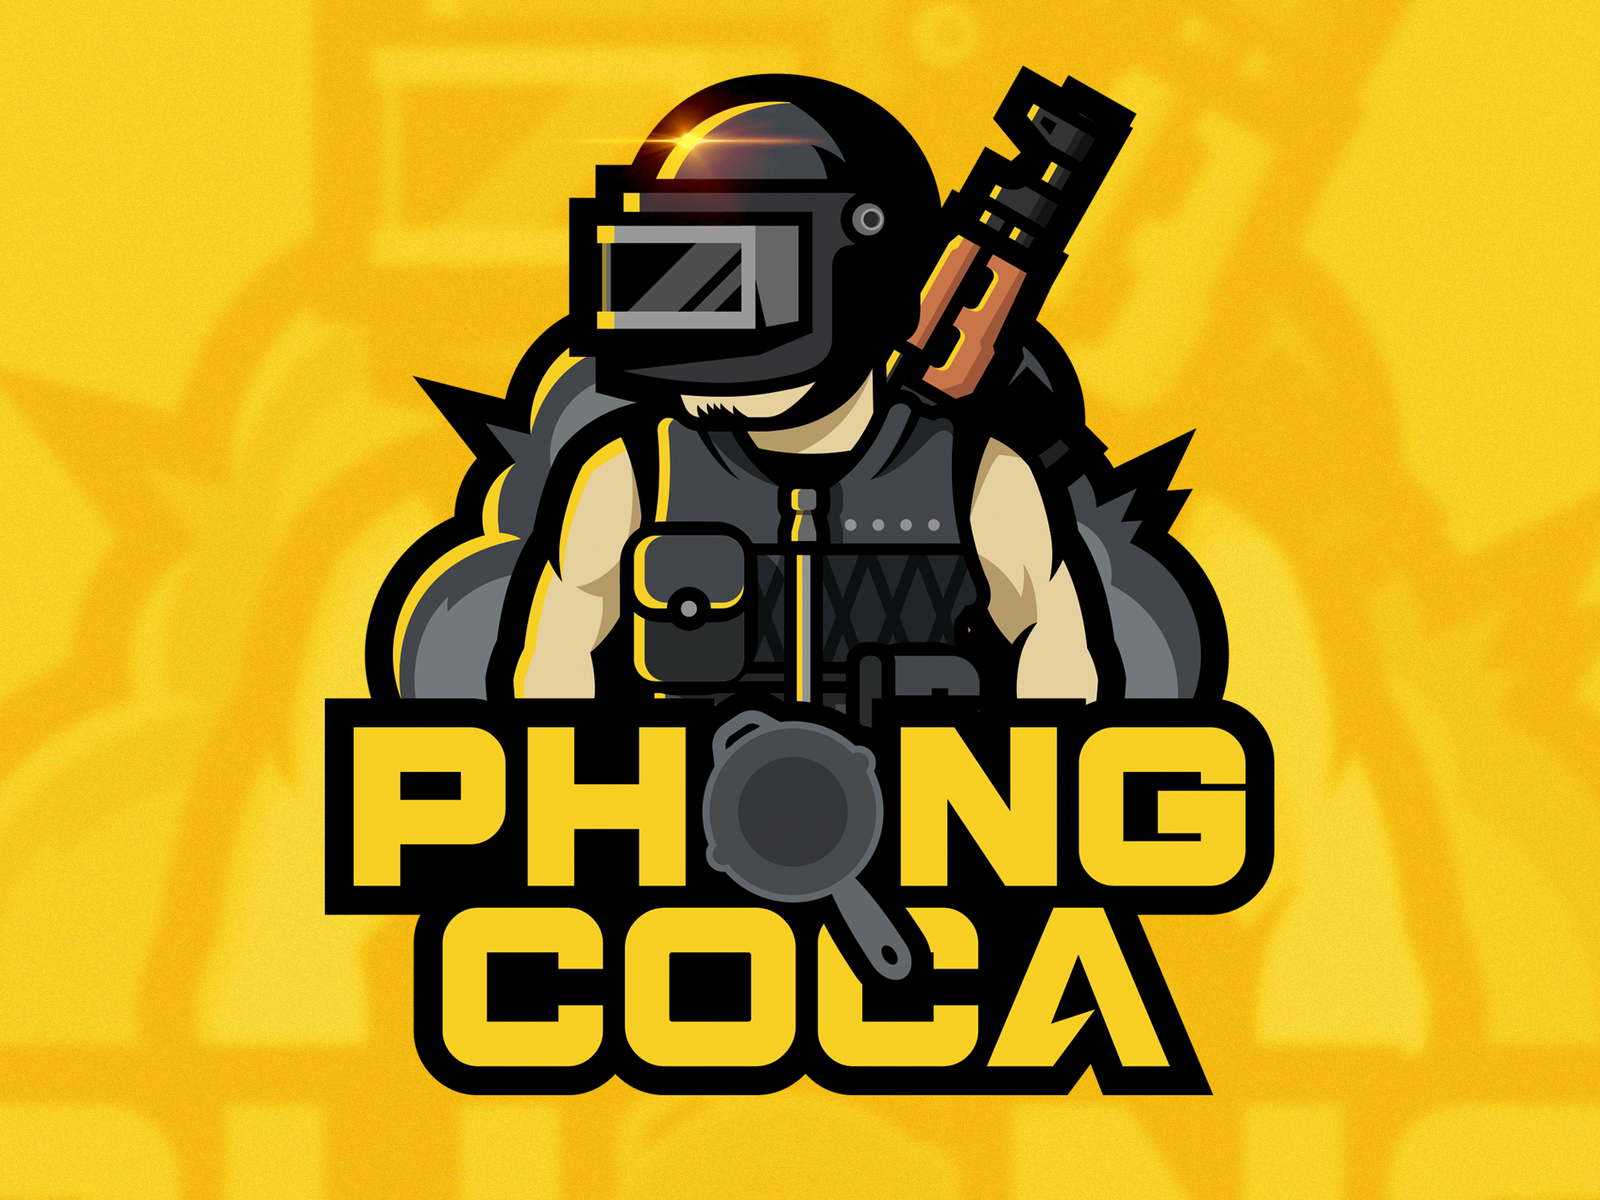 210+ Pubg Mascot Logo Pack | Best Pubg PNG Pack By OMEGA OFFICIAL - YouTube